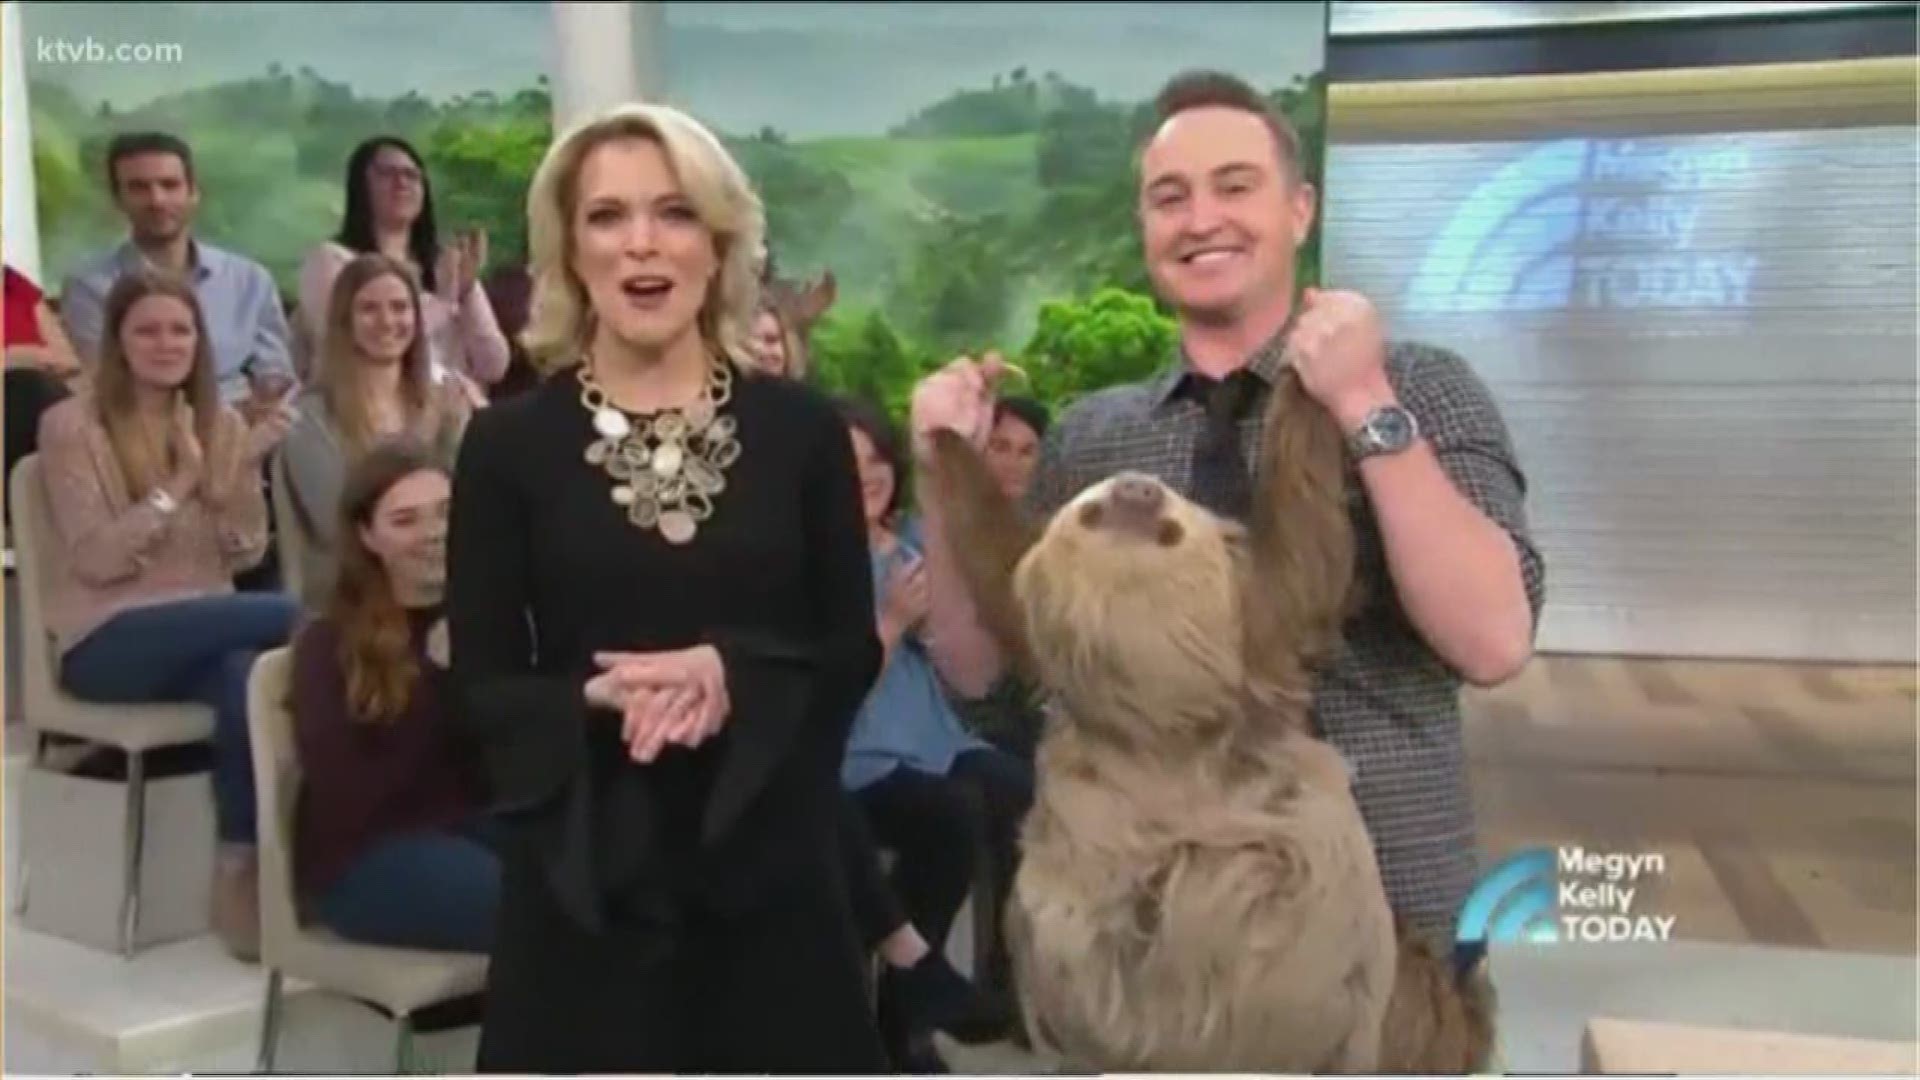 Watch as Corbin introduces Megyn to several exotic animals.